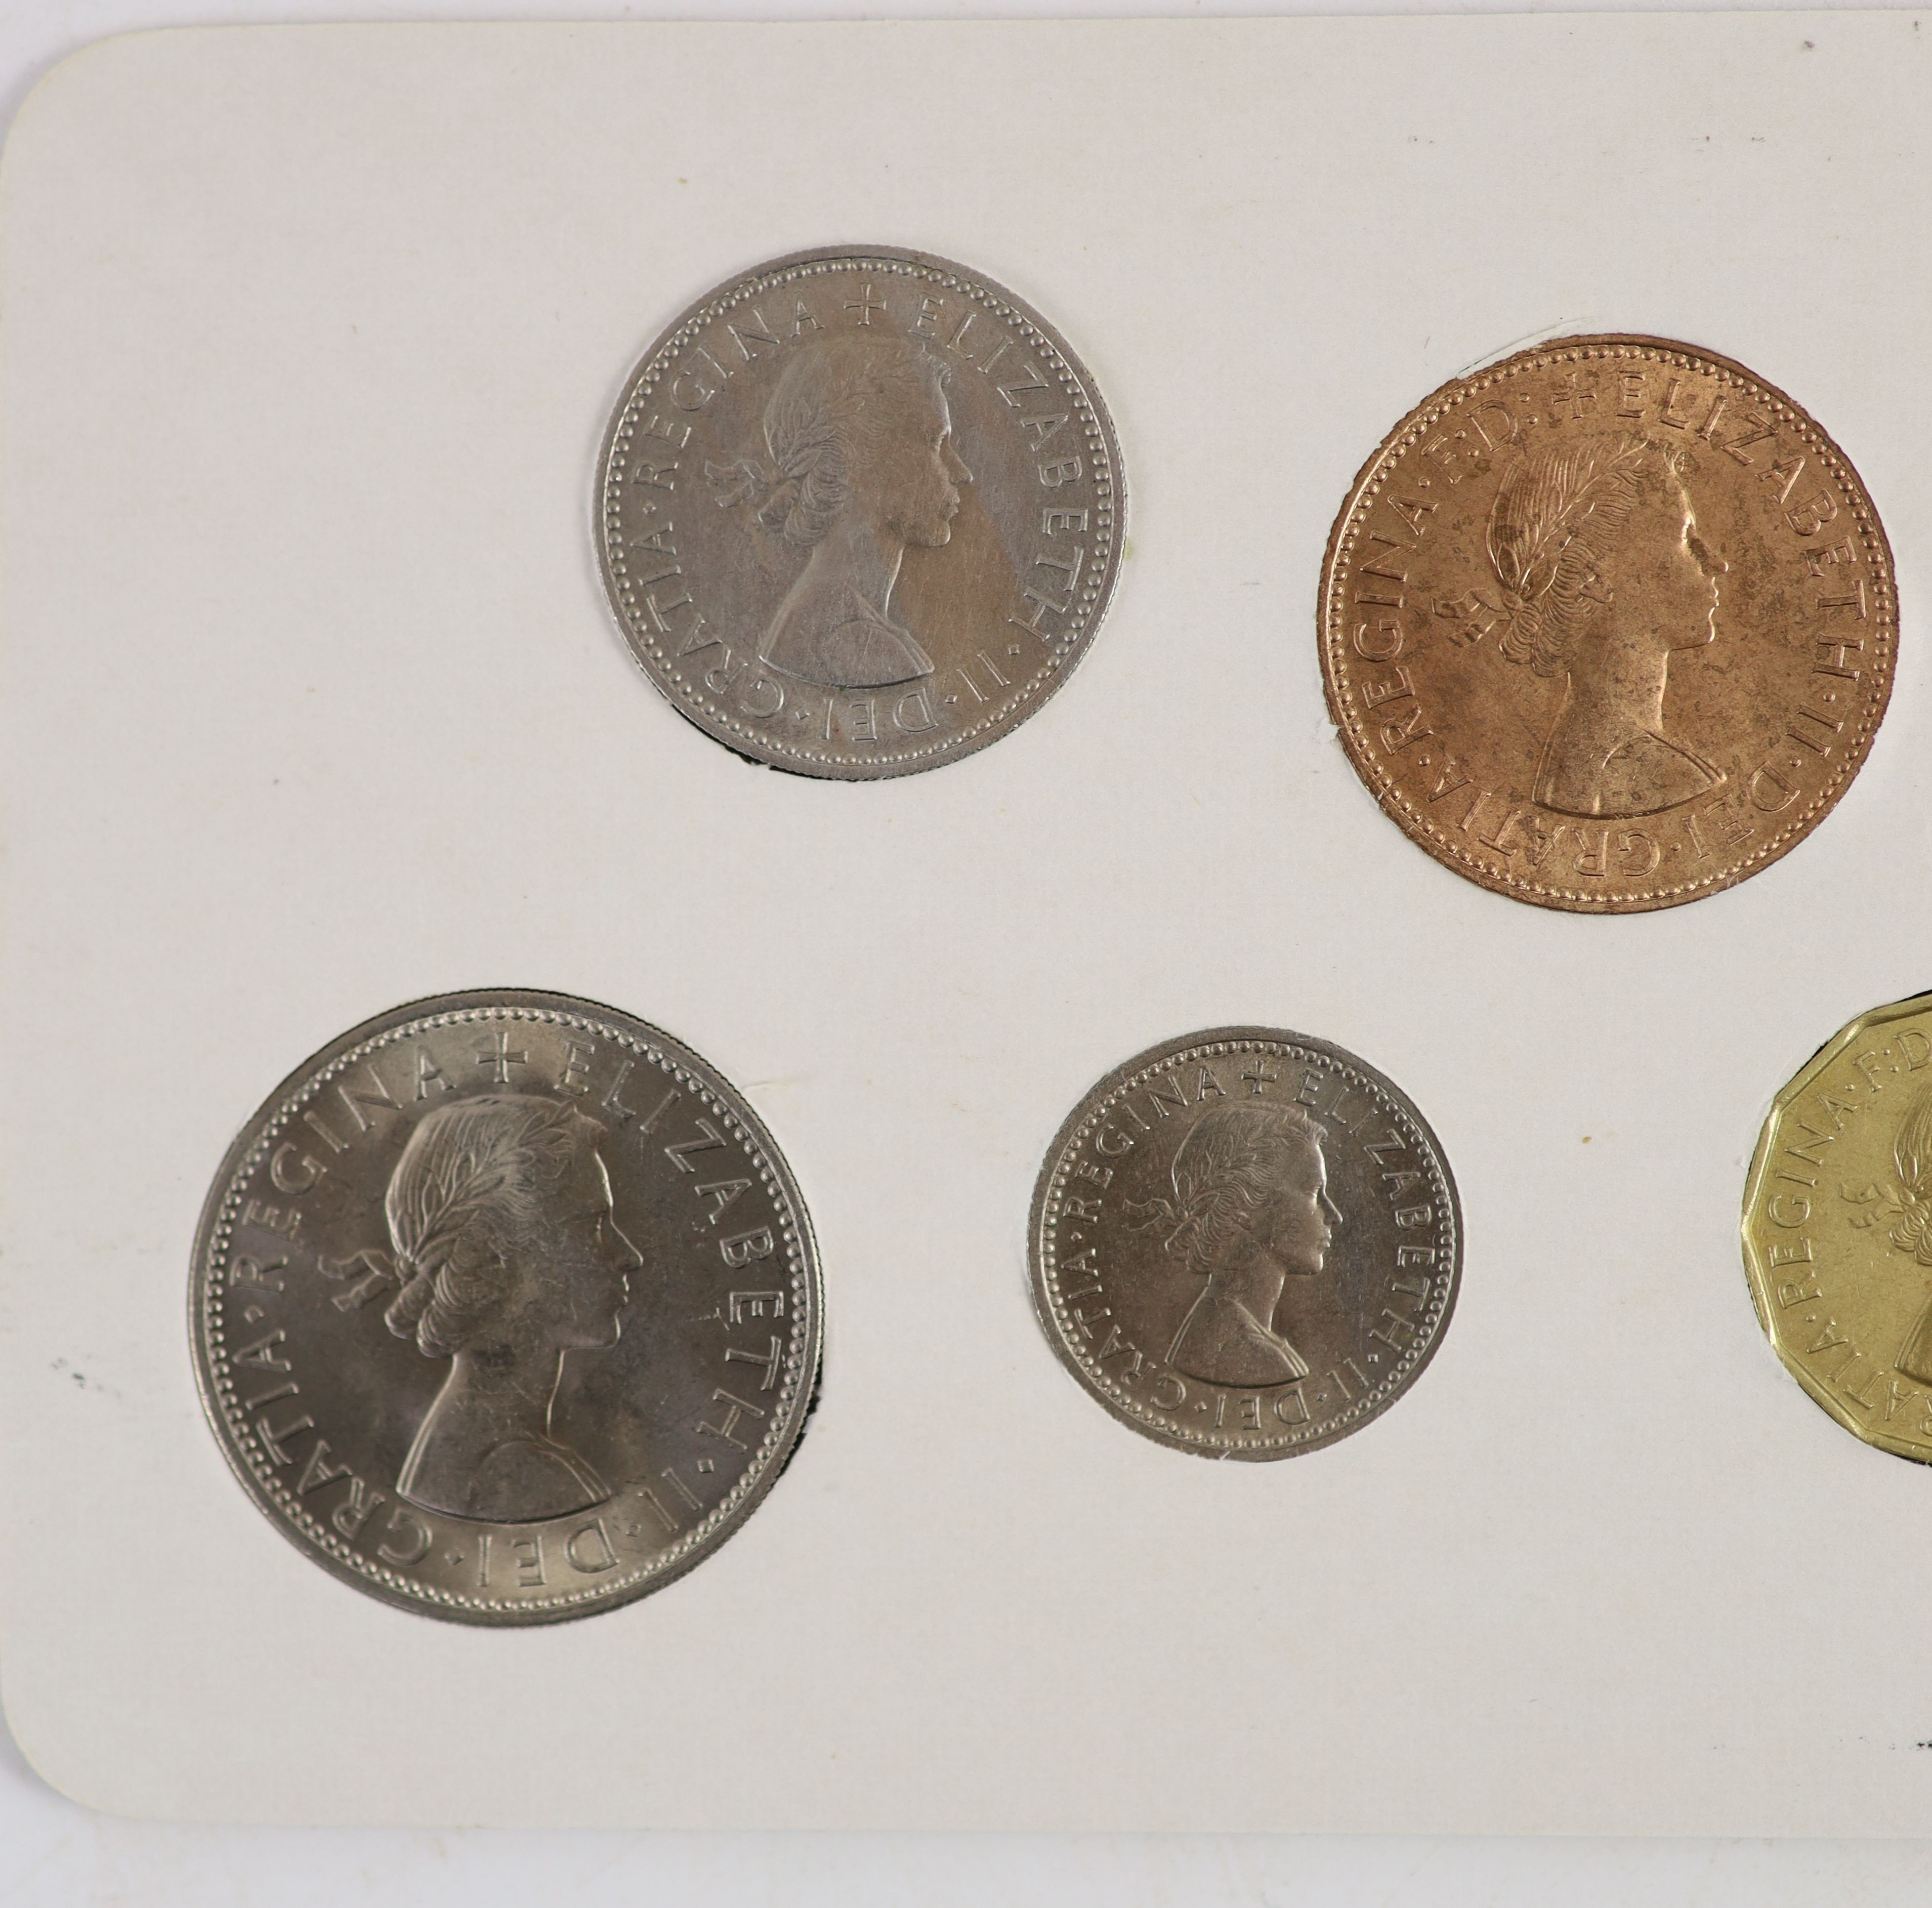 Queen Elizabeth II pre-decimal specimen coin sets for 1953 - 1967, first and second issues, all EF/ - Image 34 of 34